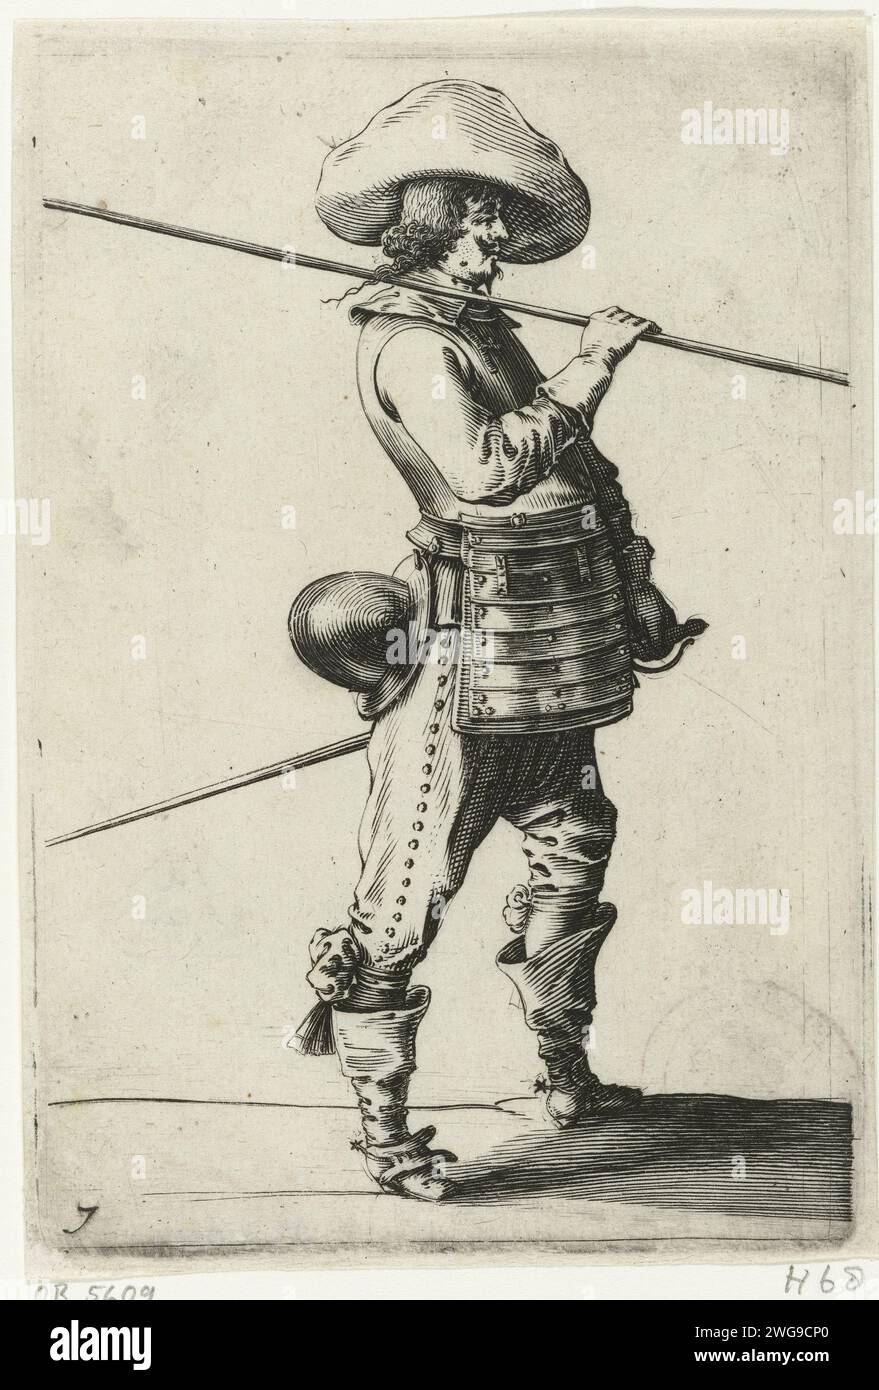 Standing soldier with Borstkuras and spear over the shoulder, and Profil, Salomon Savery, after Pieter Jansz Quast, 1630 - 1665  The print is part of a ten-part series with performances of armed officers and soldiers, dressed according to Dutch fashion ca. 1625-1635. Amsterdam paper engraving clothes, costume (+ men's clothes). the soldier; the soldier's life. helved weapons, polearms (for striking, hacking, thrusting): lance Stock Photo